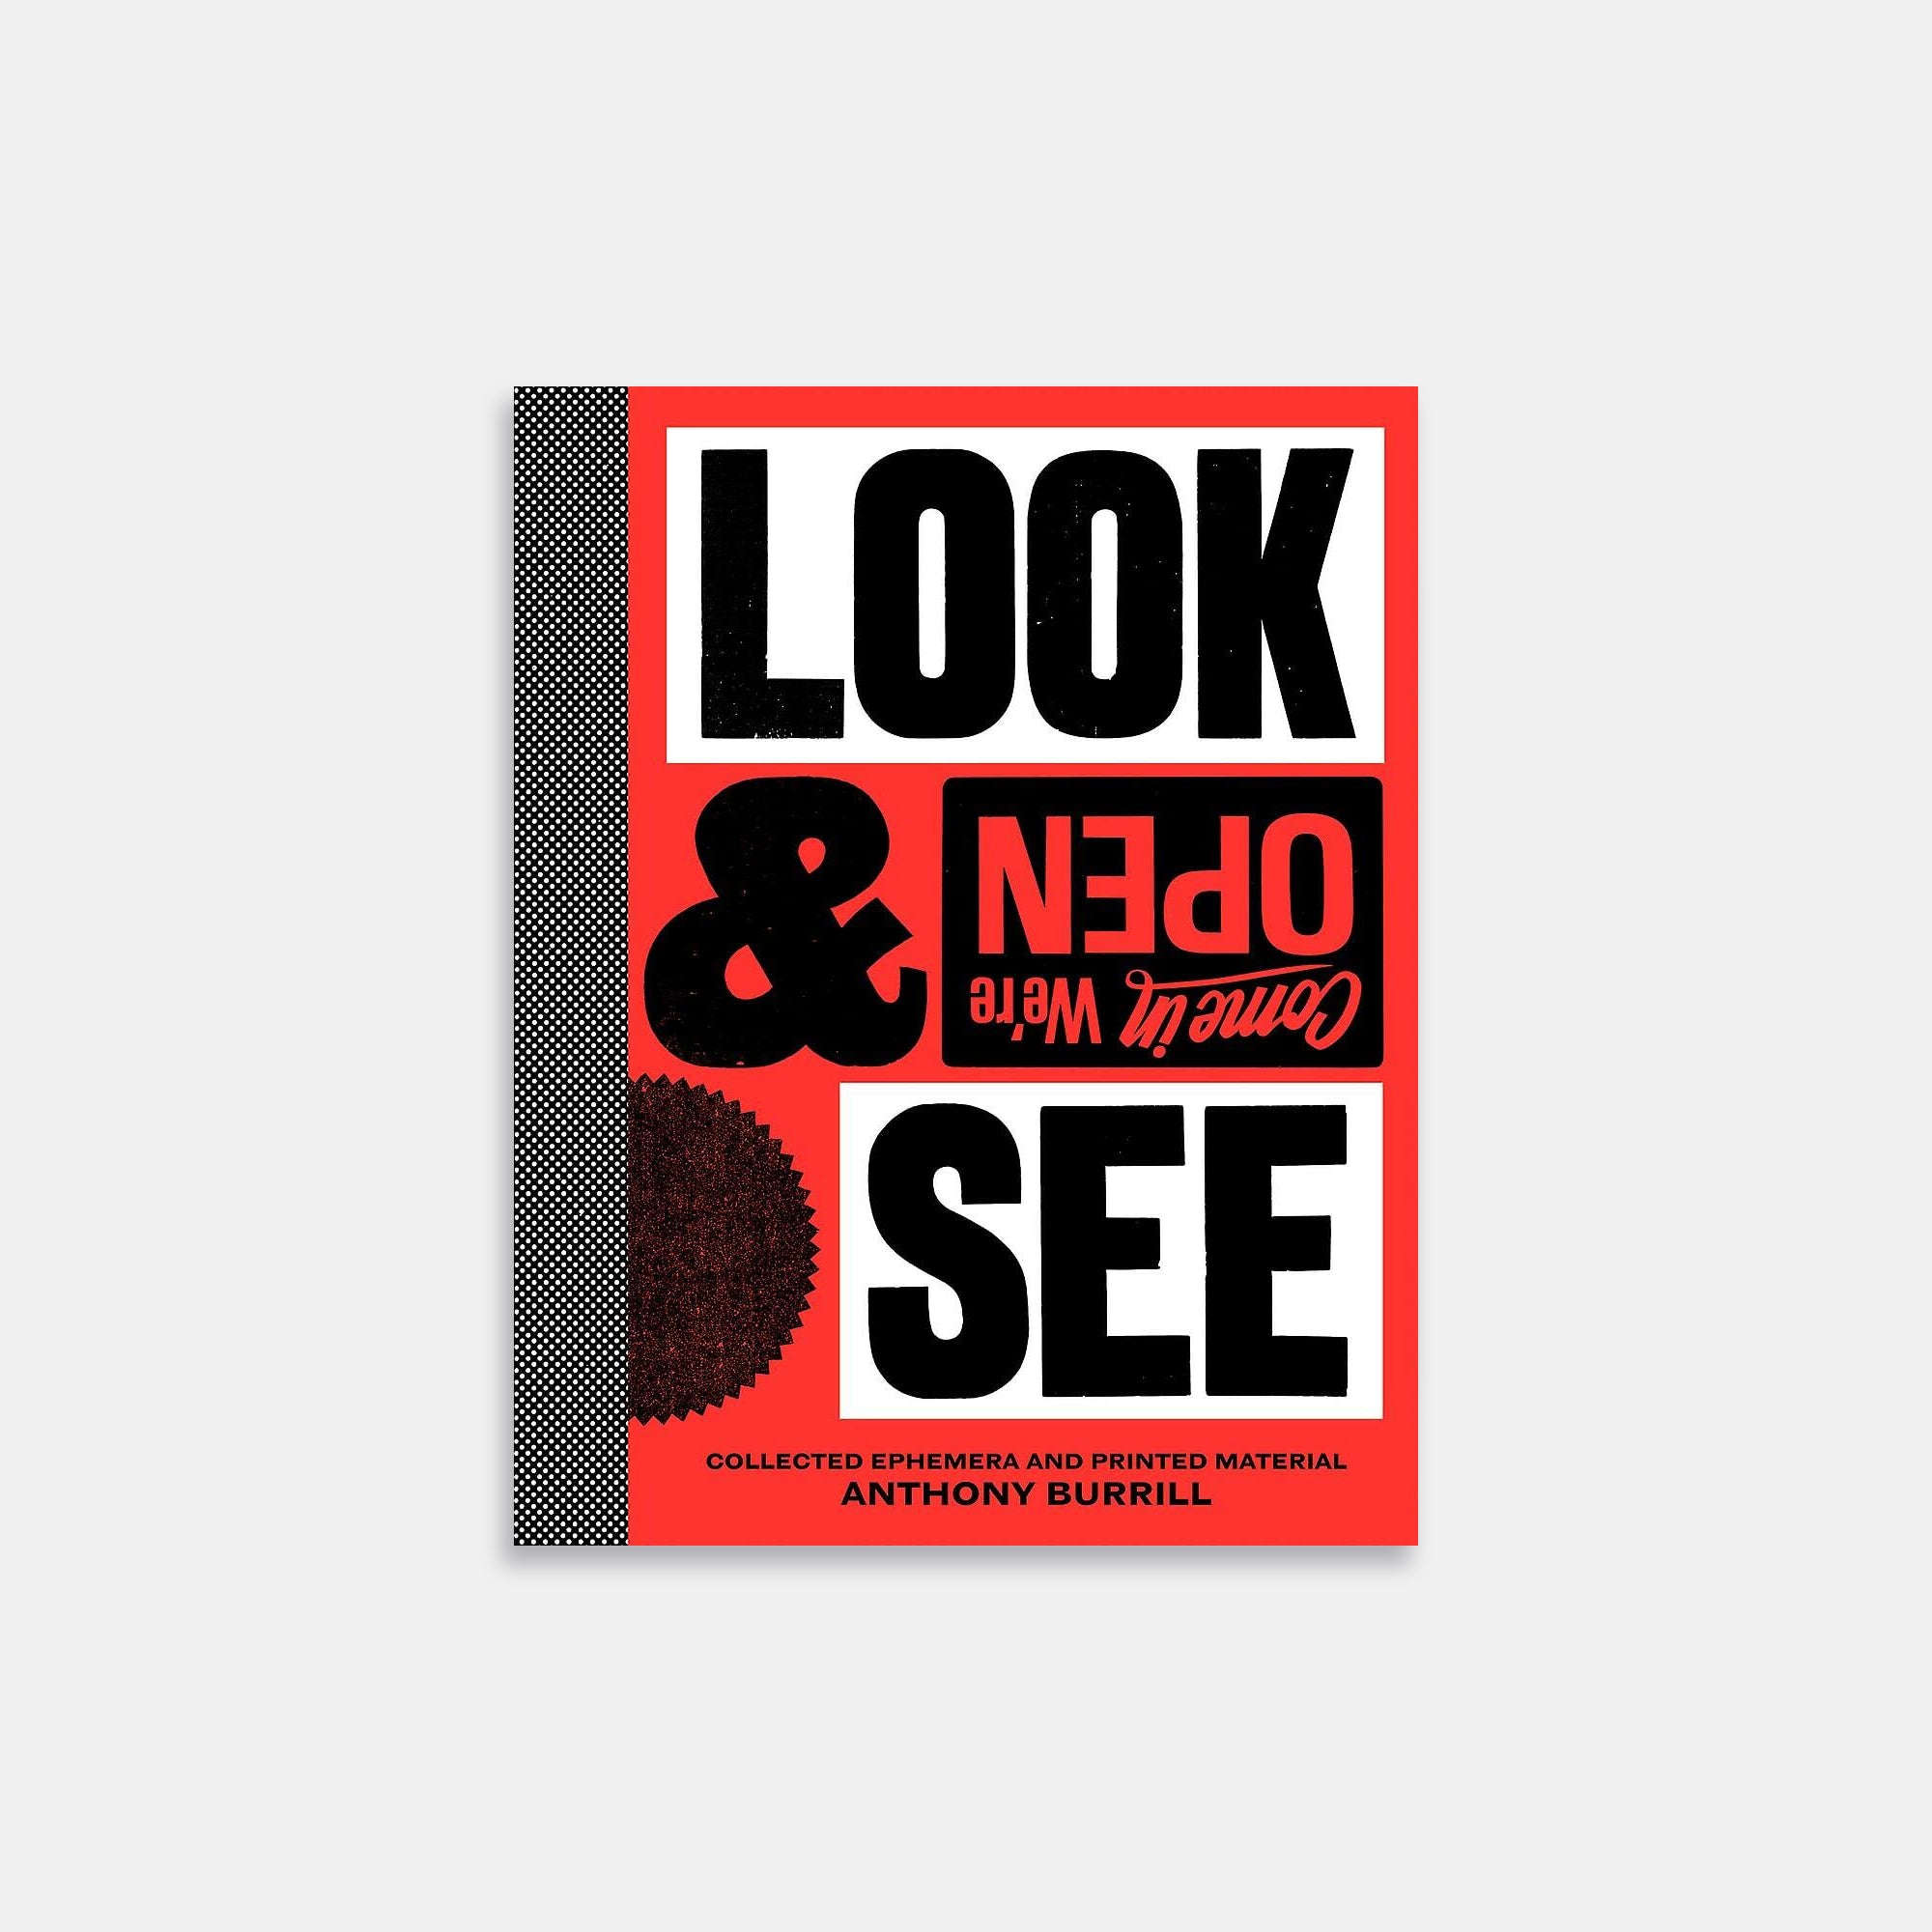 Look & See: Collected Ephemera and Printed Material